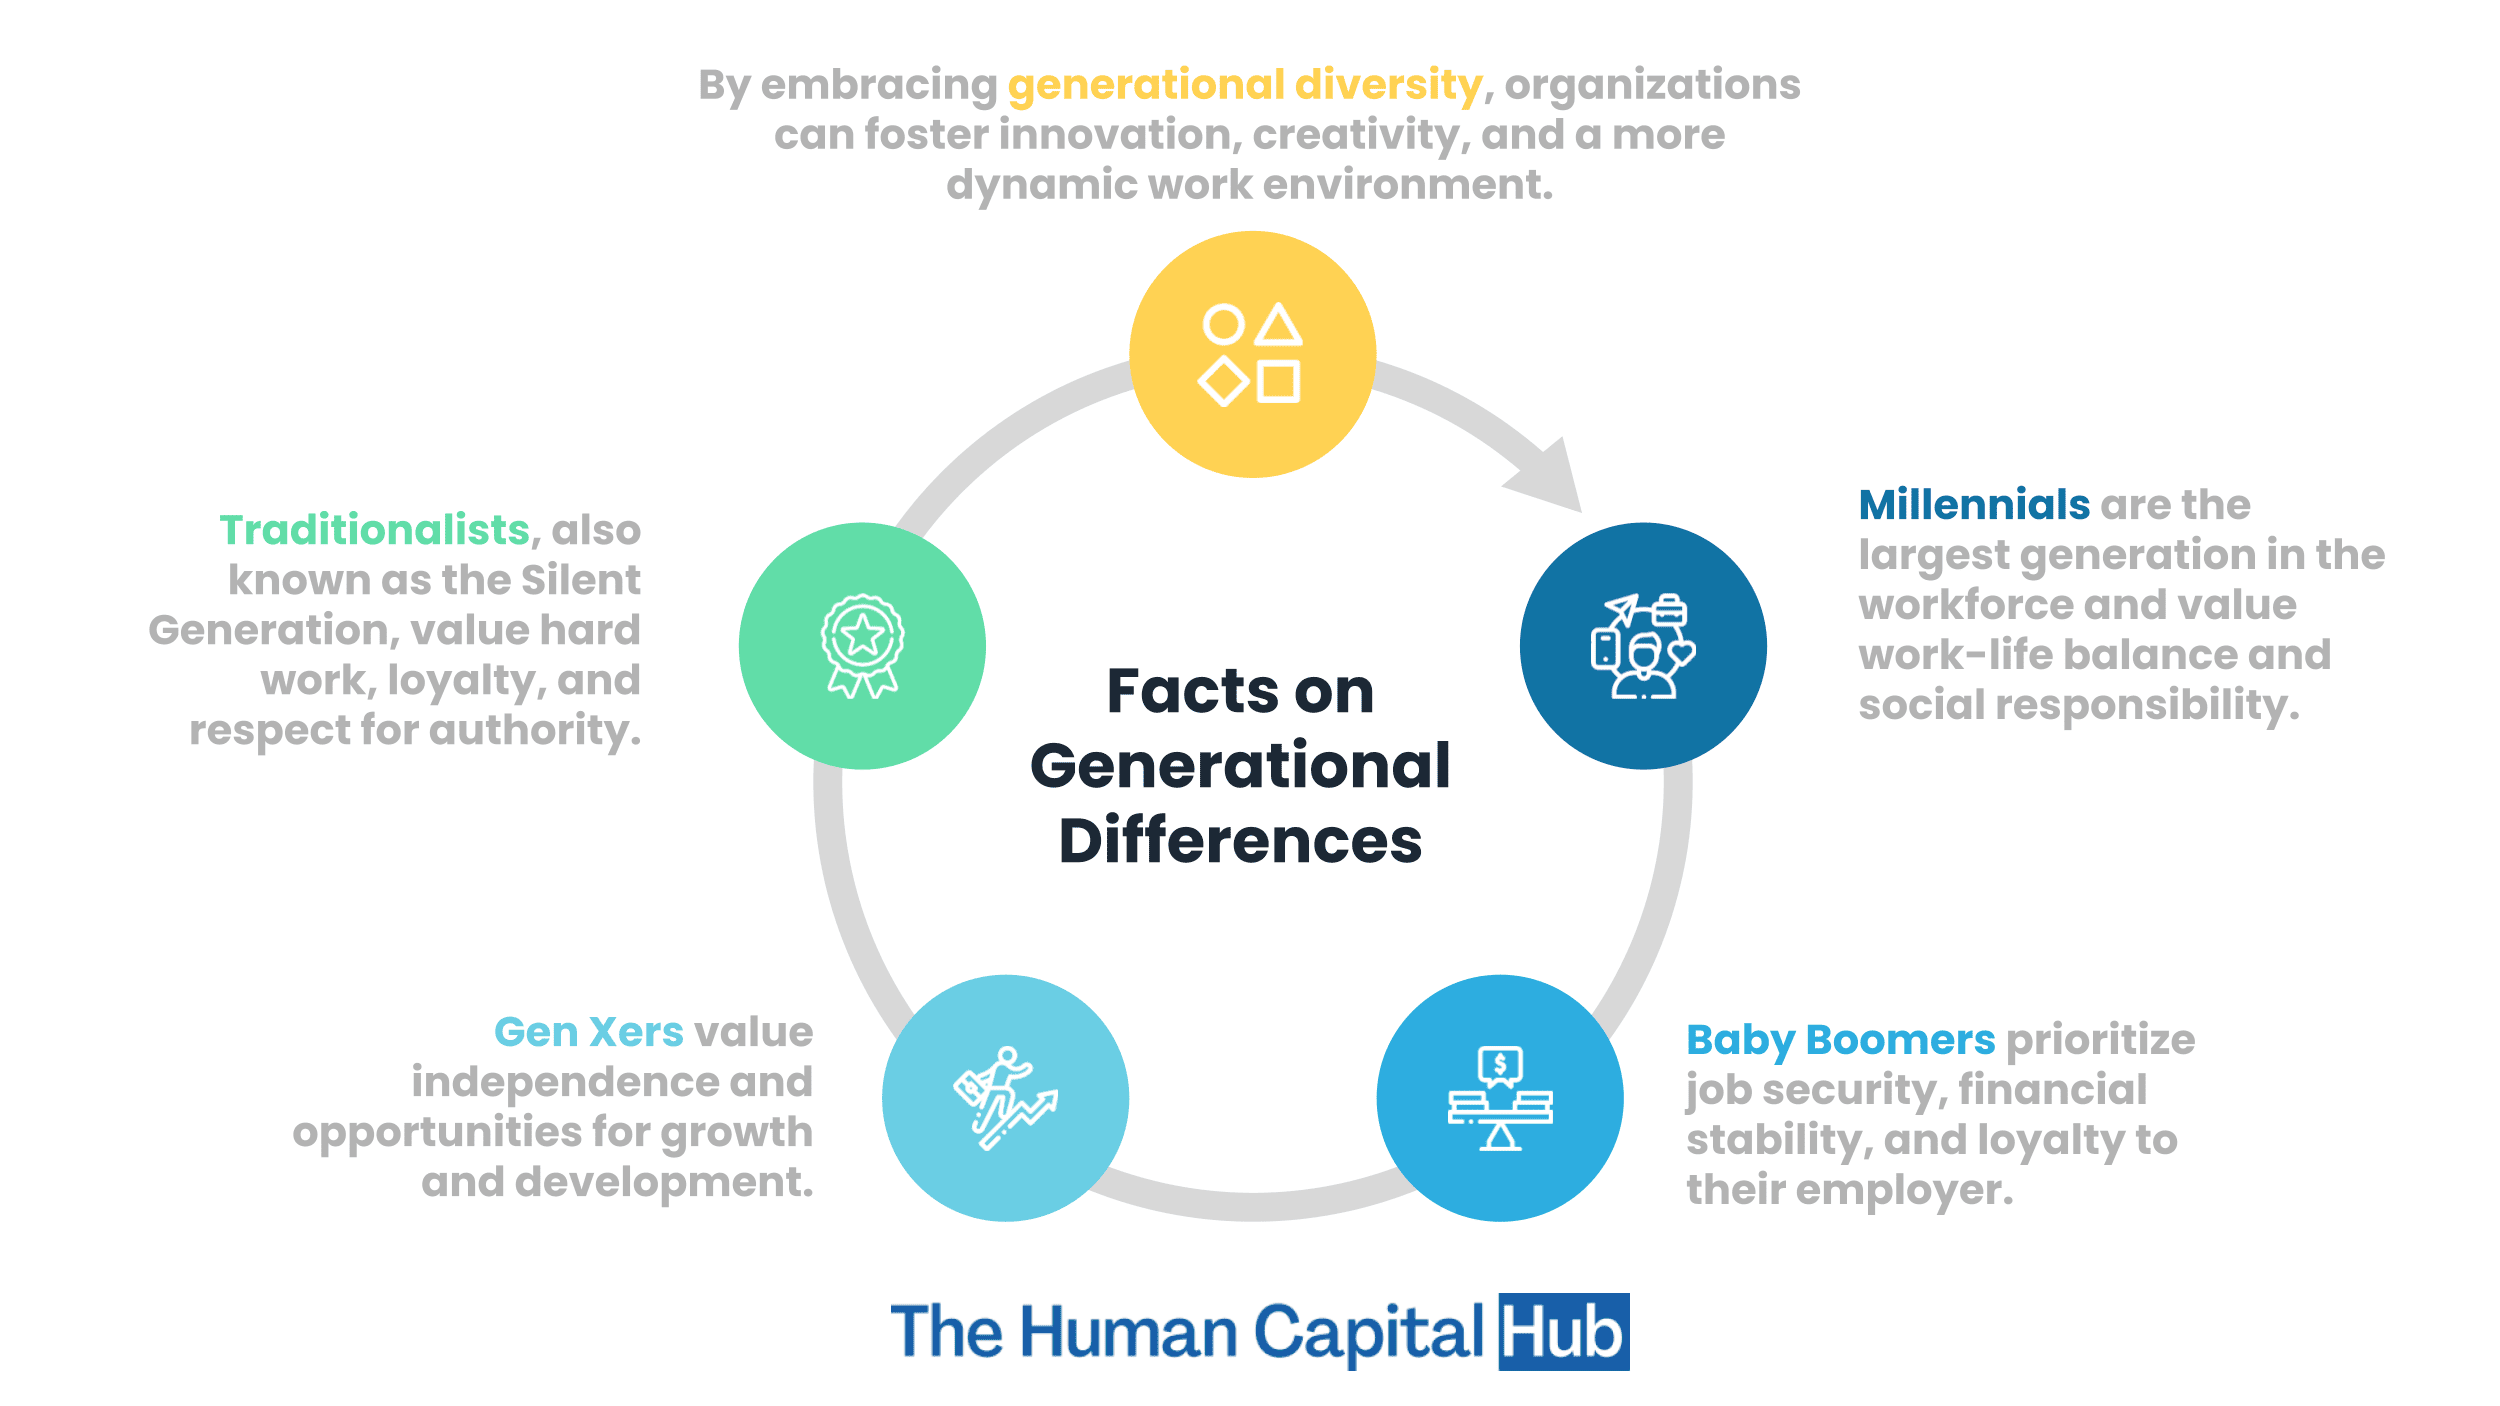 9 Facts on Generational Differences and Work Outcomes